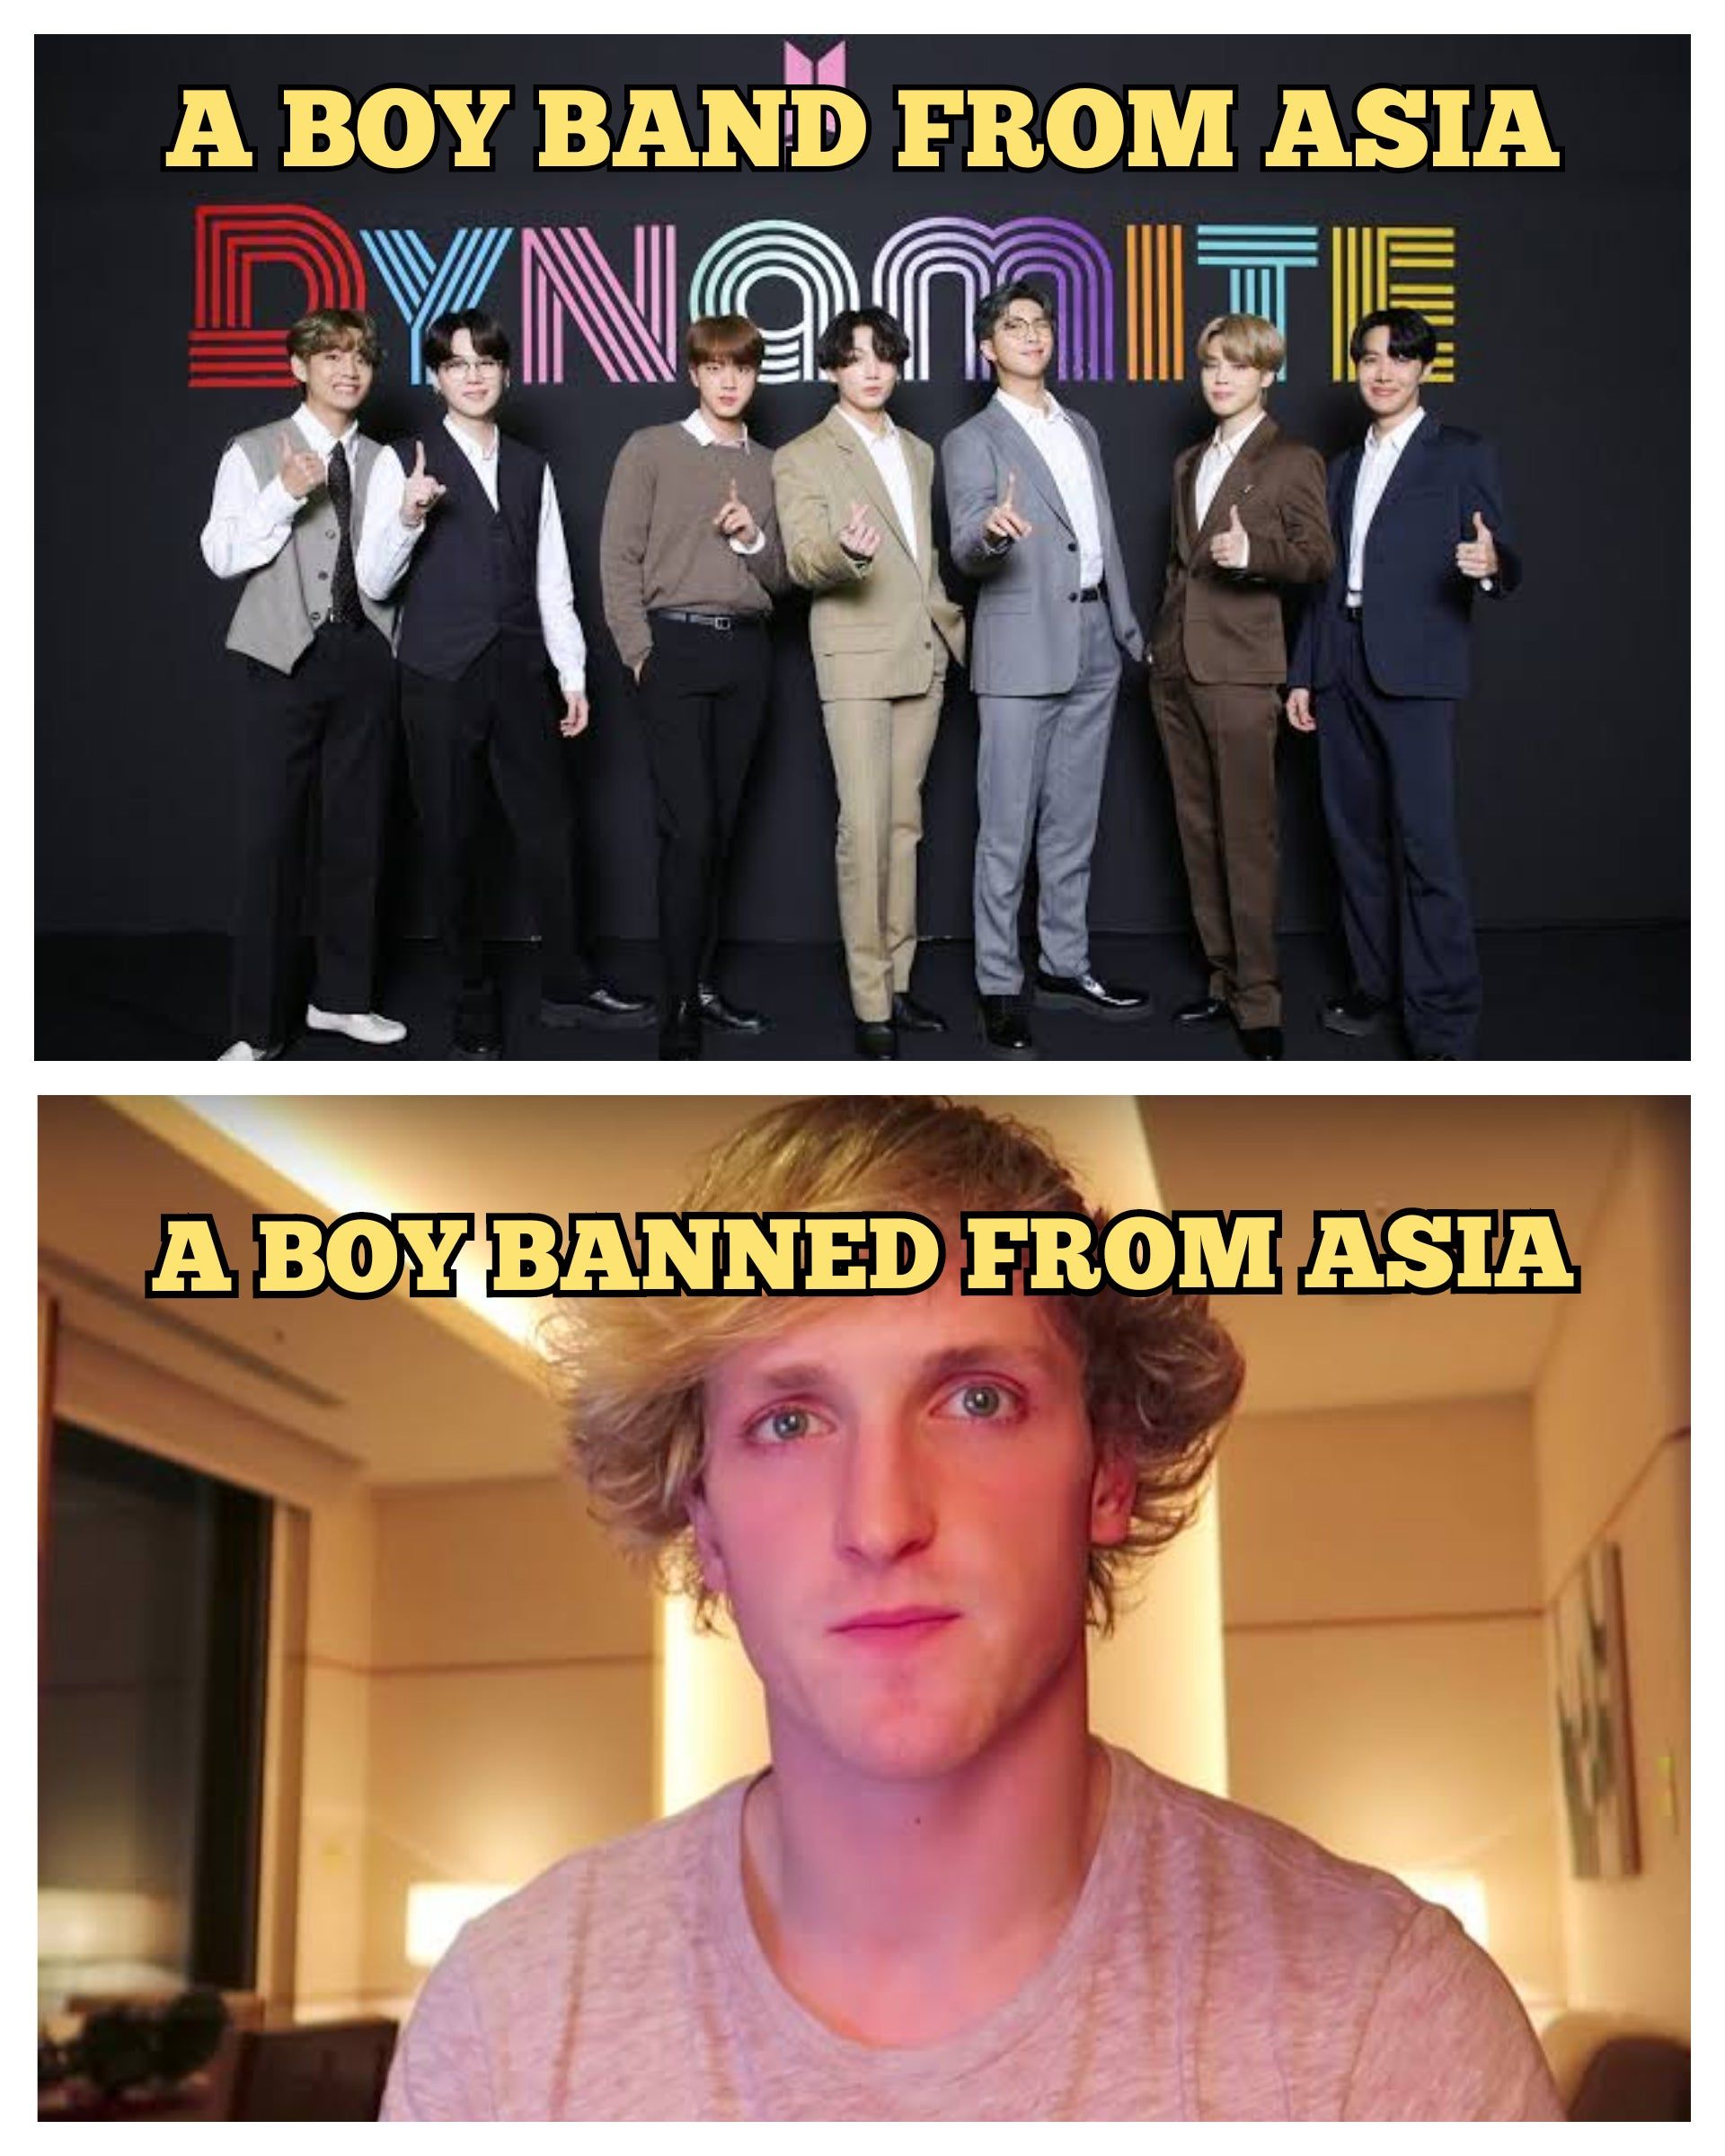 What's the difference between BTS and Logan Paul?